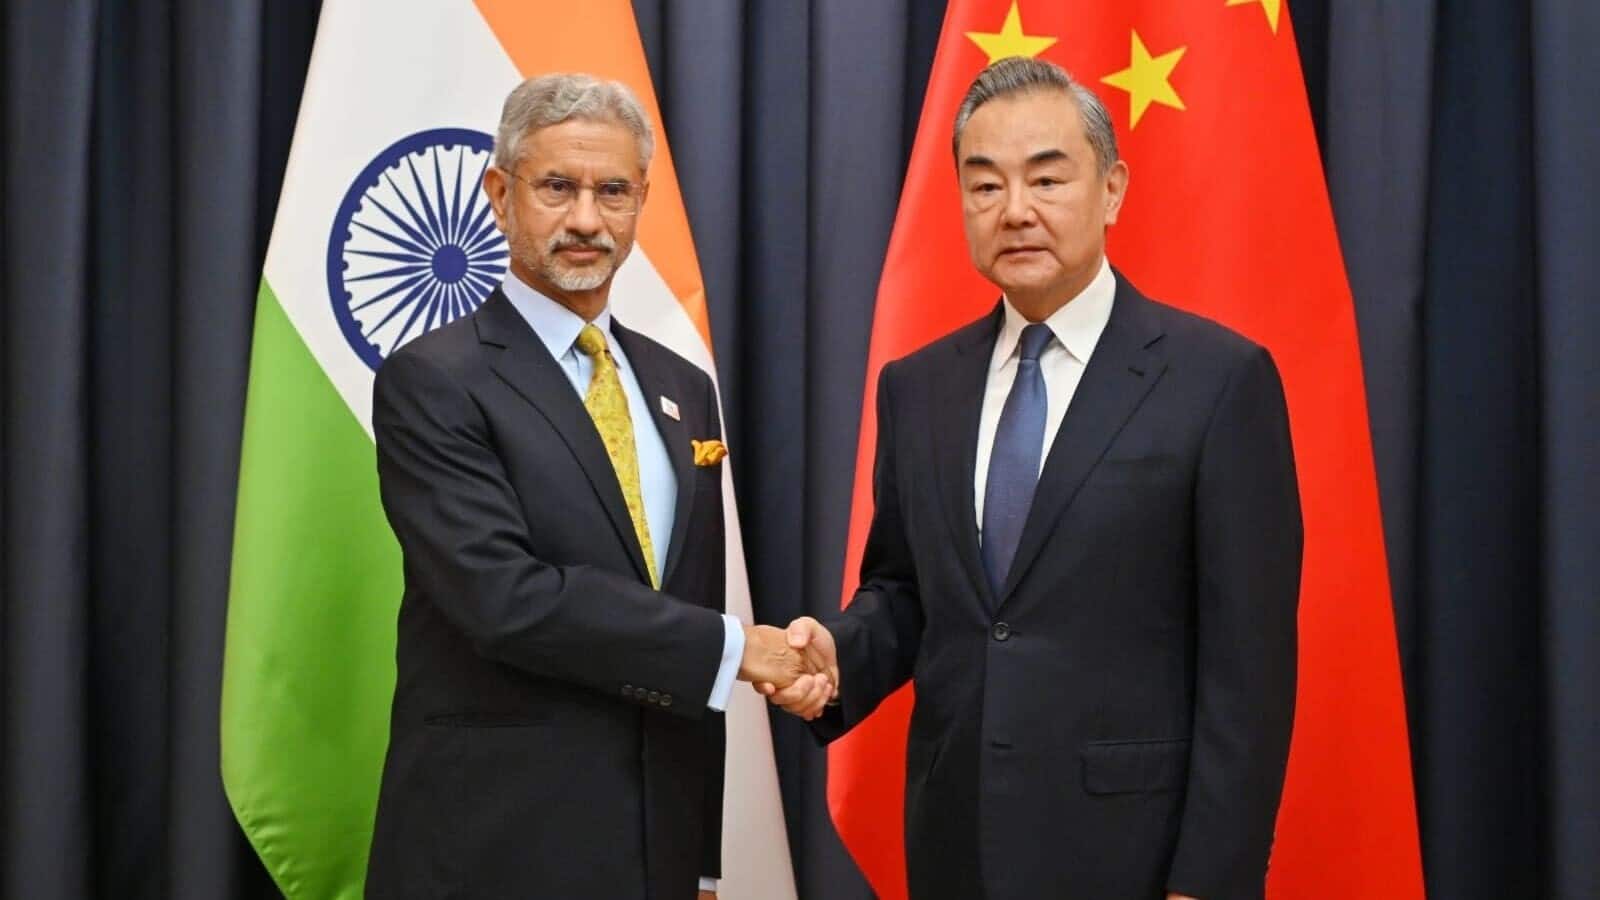 Jaishankar discusses border issues with Chinese counterpart at SCO summit